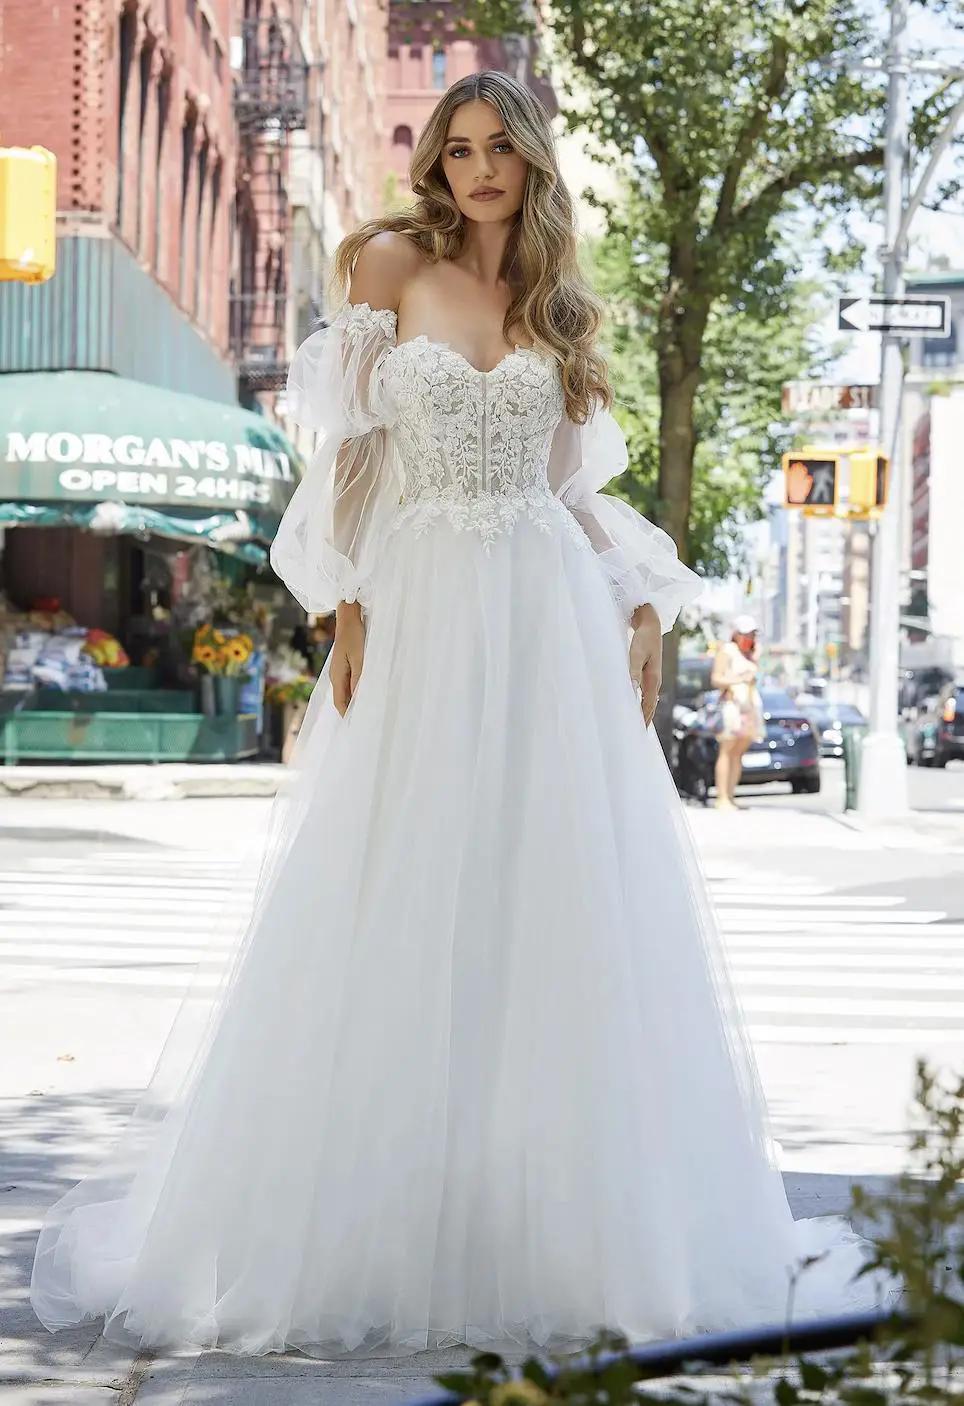 Find Your Perfect Wedding Gown at Bridal by Viper This Summer! Image